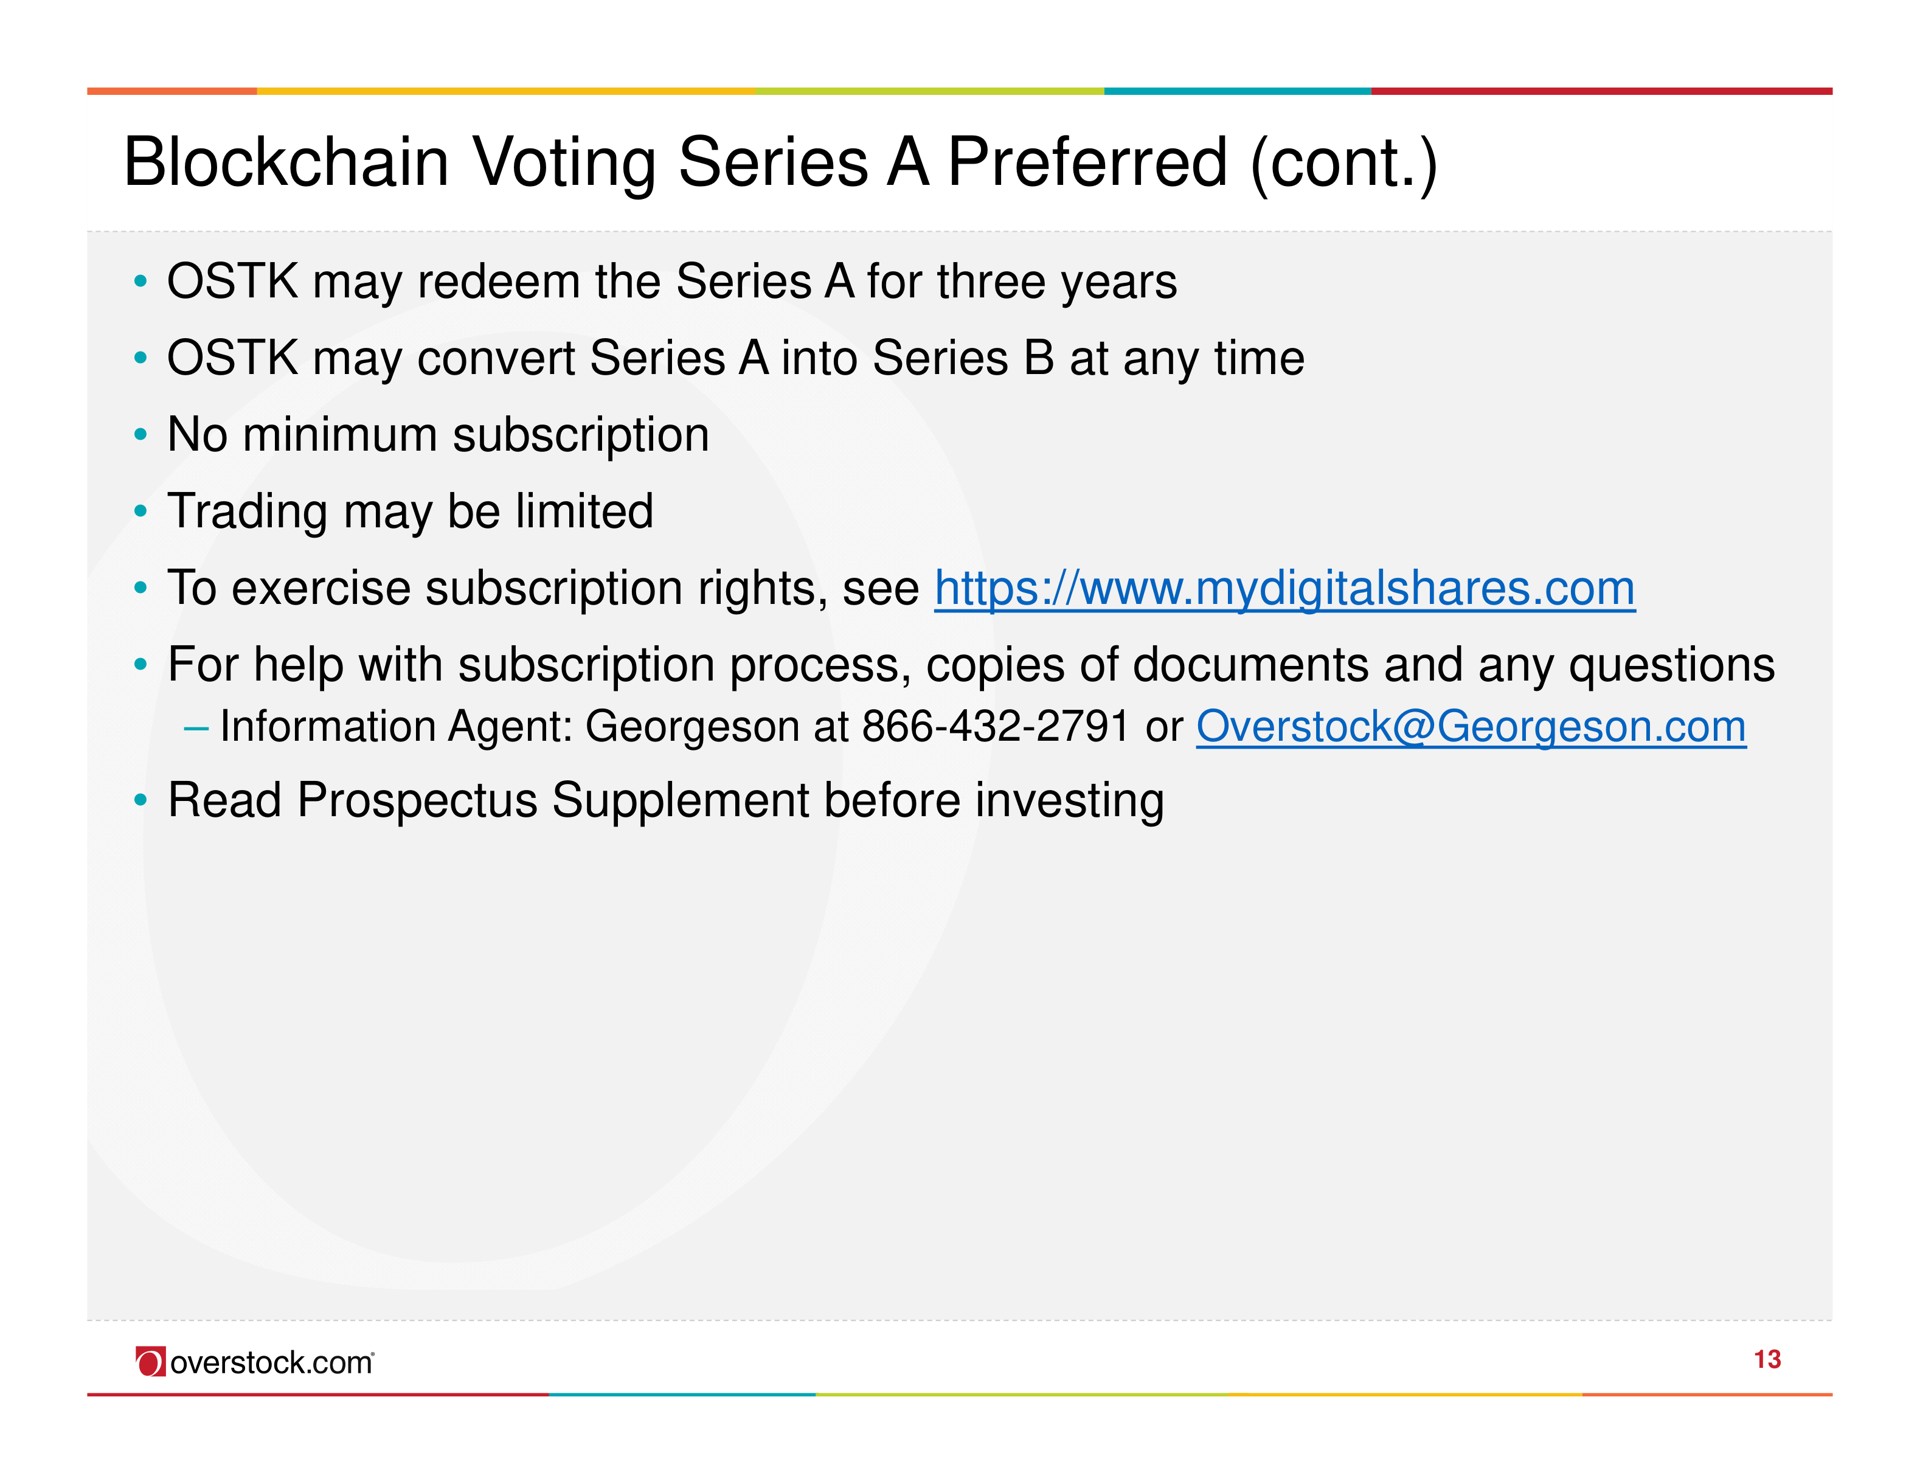 voting series a preferred | Overstock